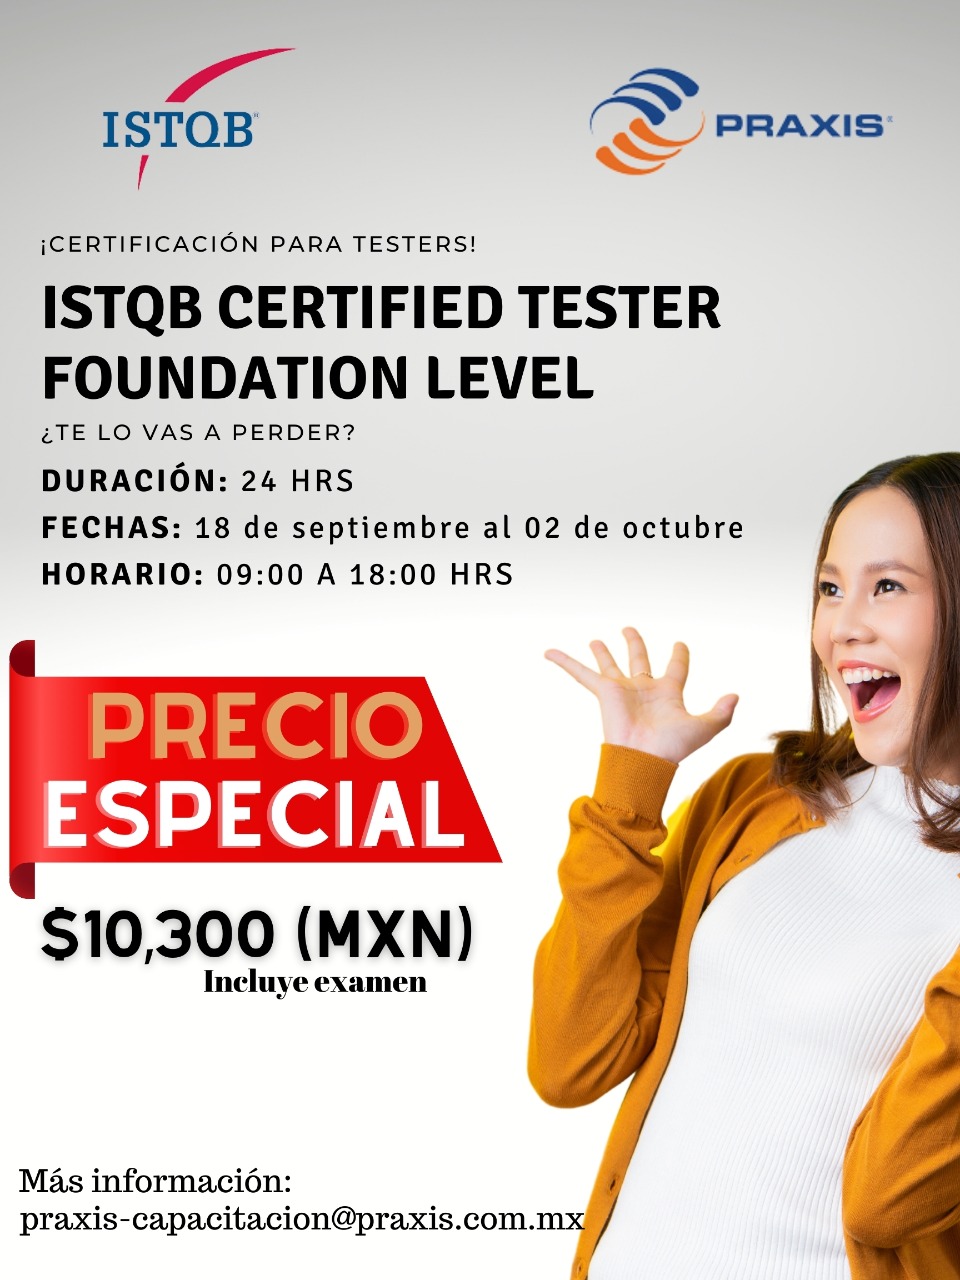 ISTQB CERTIFIED TESTER FUNDATION LEVEL